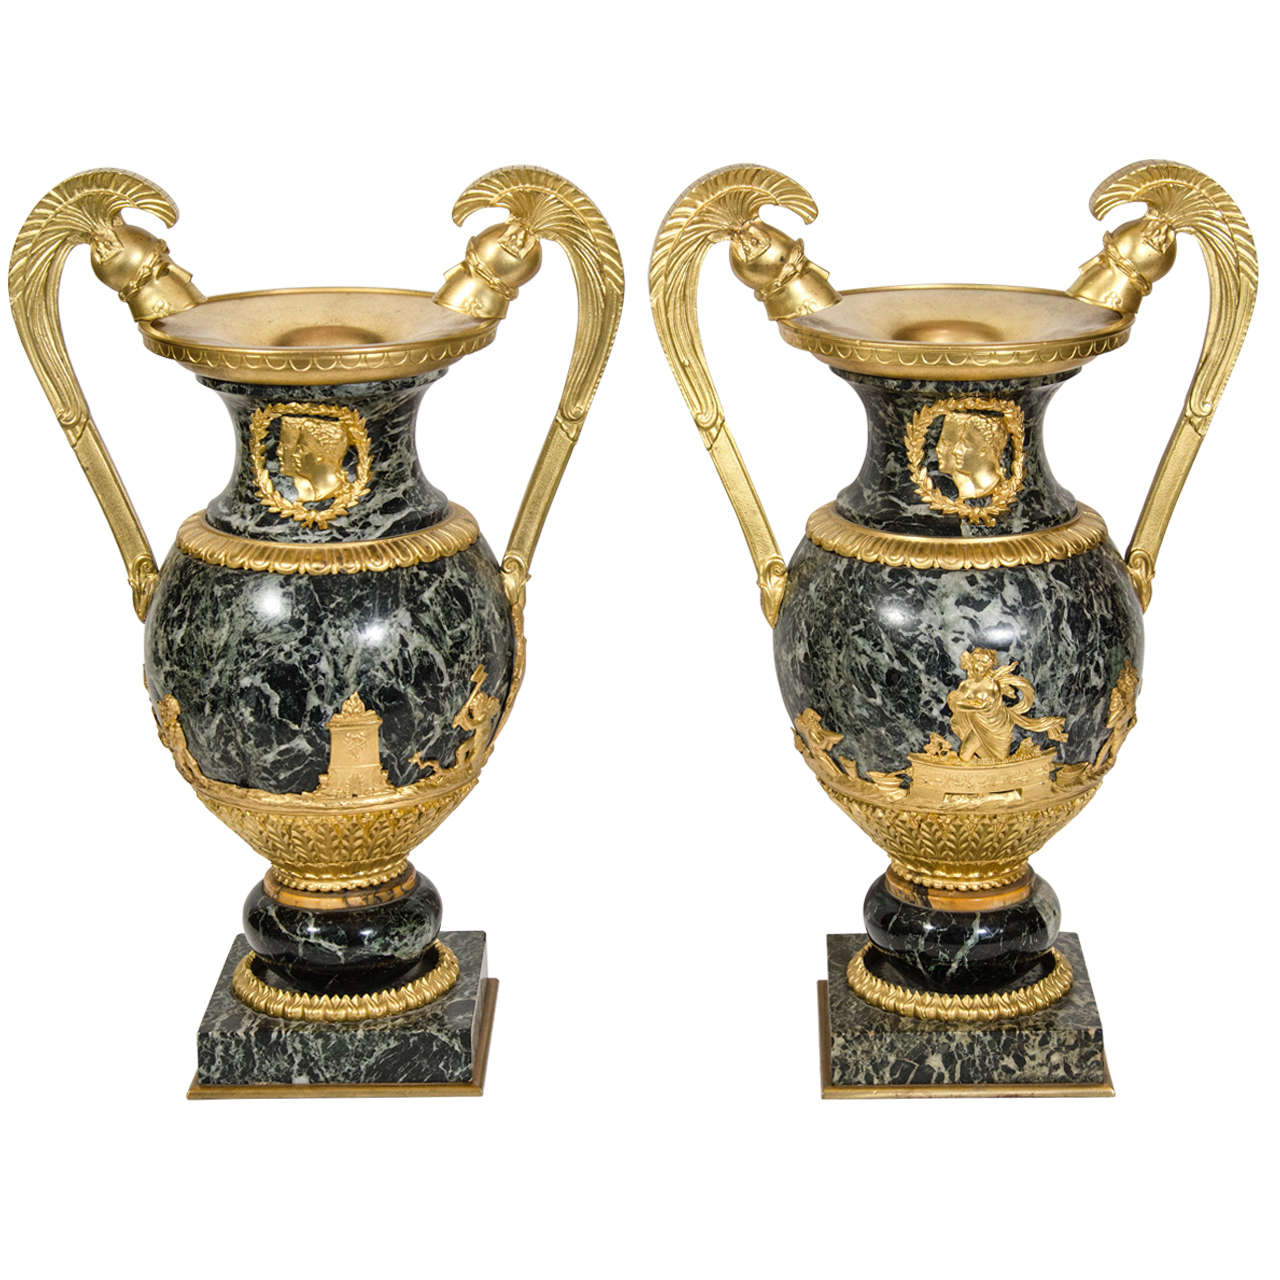 Pair of Antique French Empire Style Gilt Bronze and Green Marble Military Urns